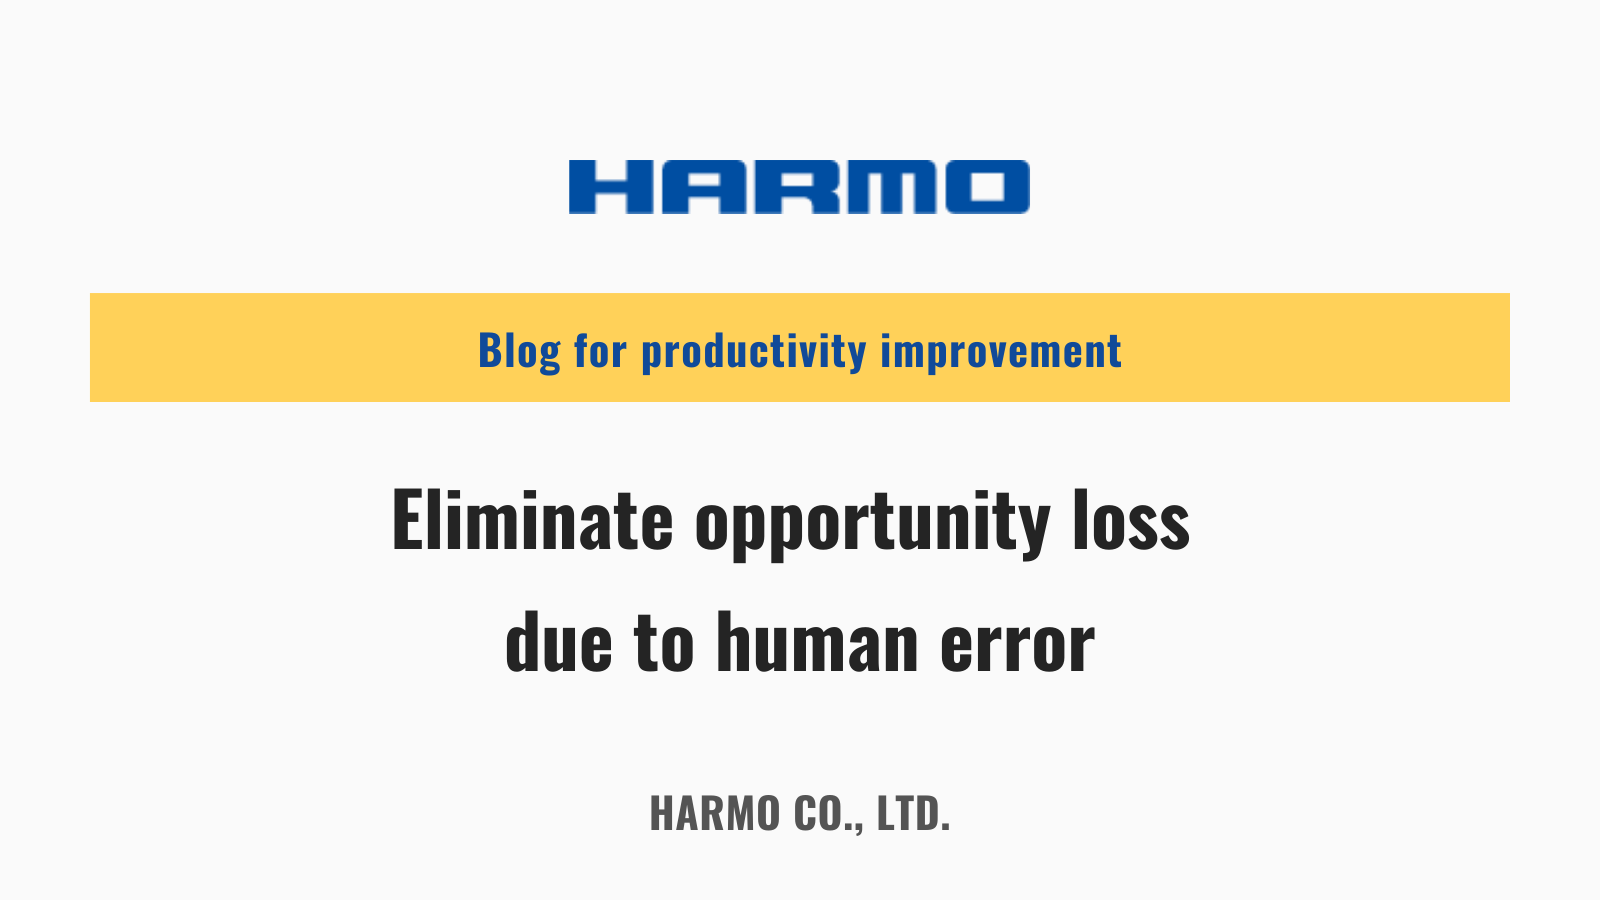 Eliminate opportunity loss due to human error